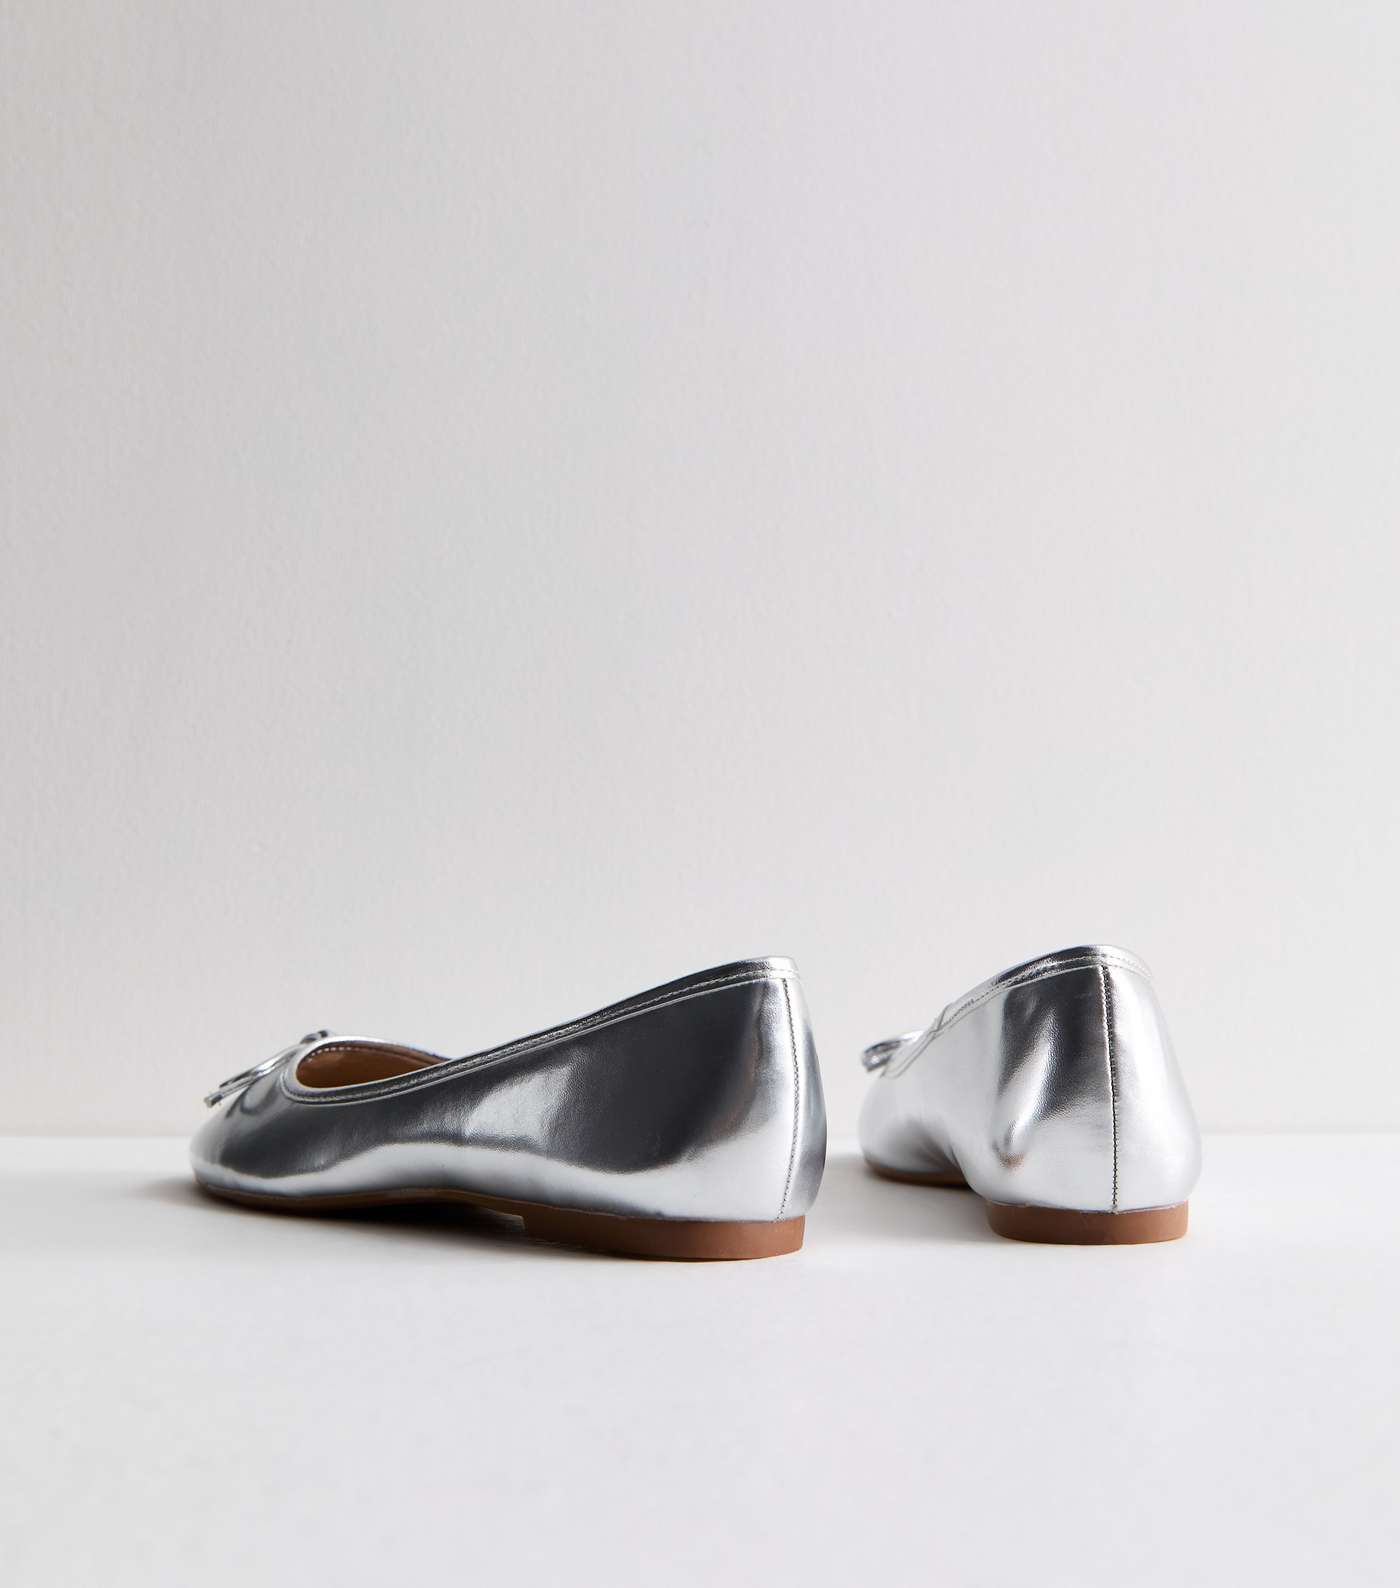 Truffle Silver Leather-Look Bow Ballerina Pumps Image 4